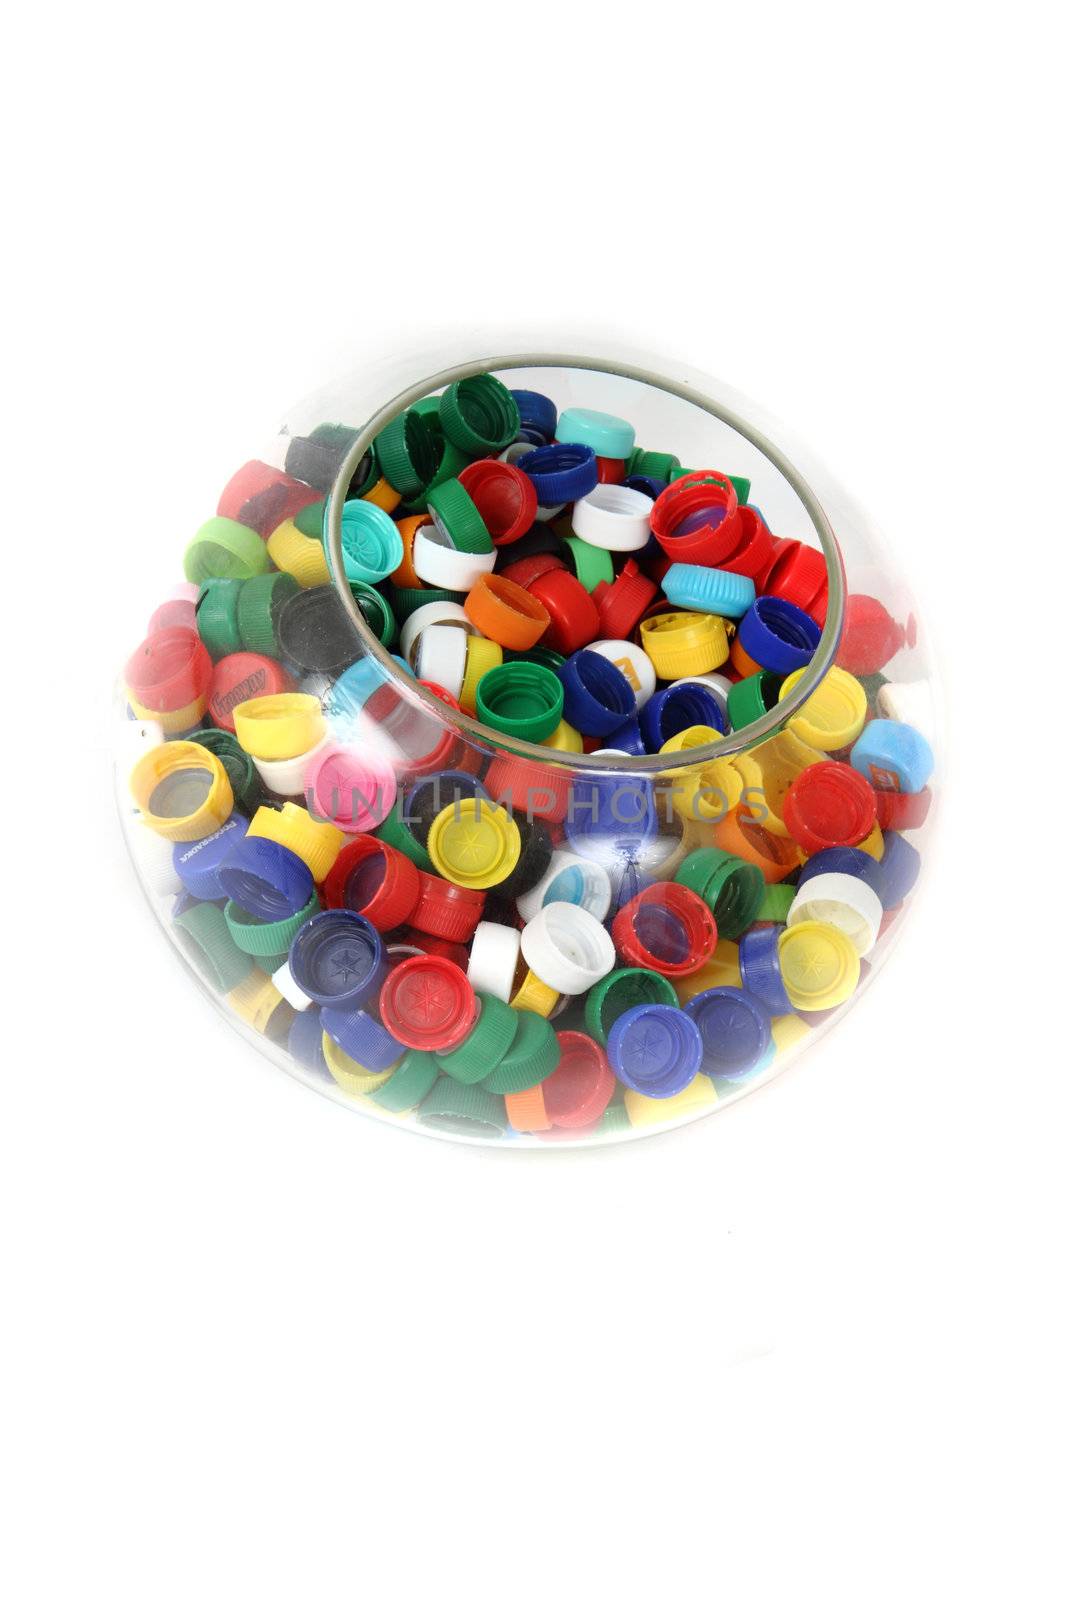 plastic caps in the glass sphere isolated on the white background